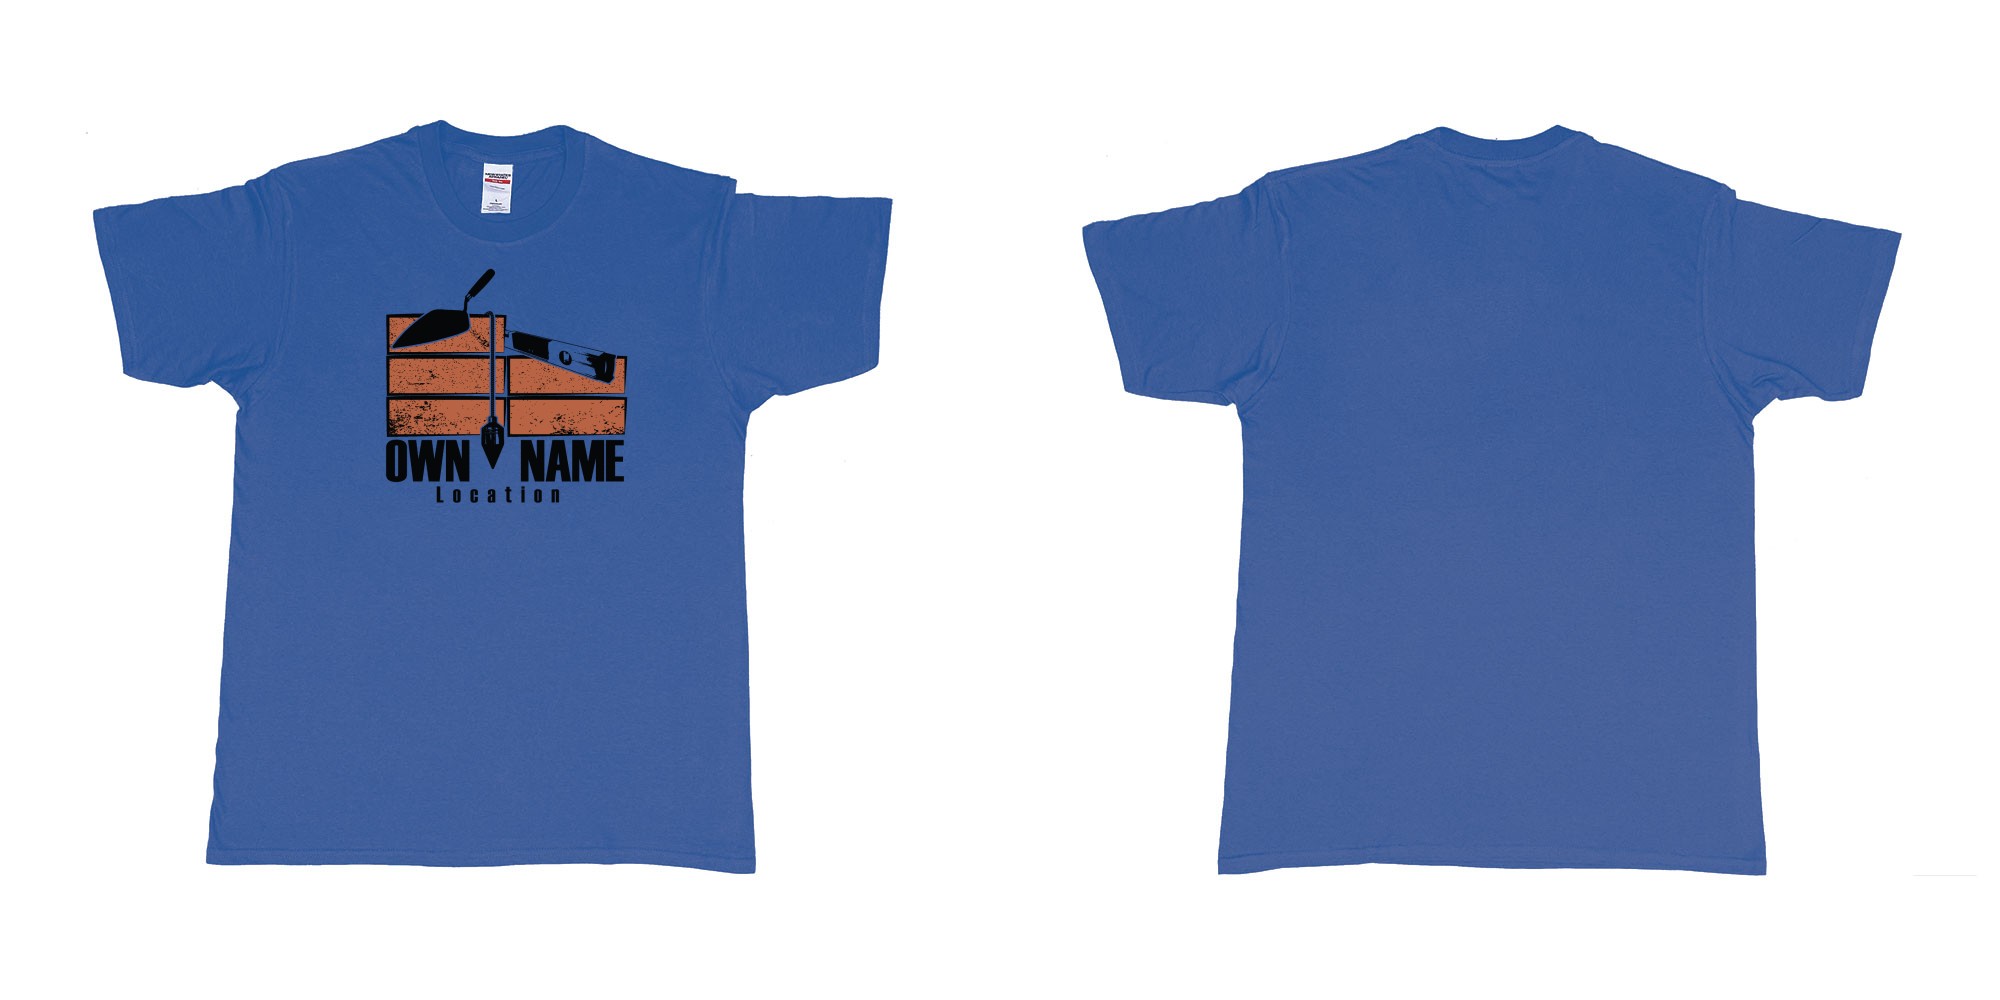 Custom tshirt design brick layer builder own custom company printing name location trowel in fabric color royal-blue choice your own text made in Bali by The Pirate Way